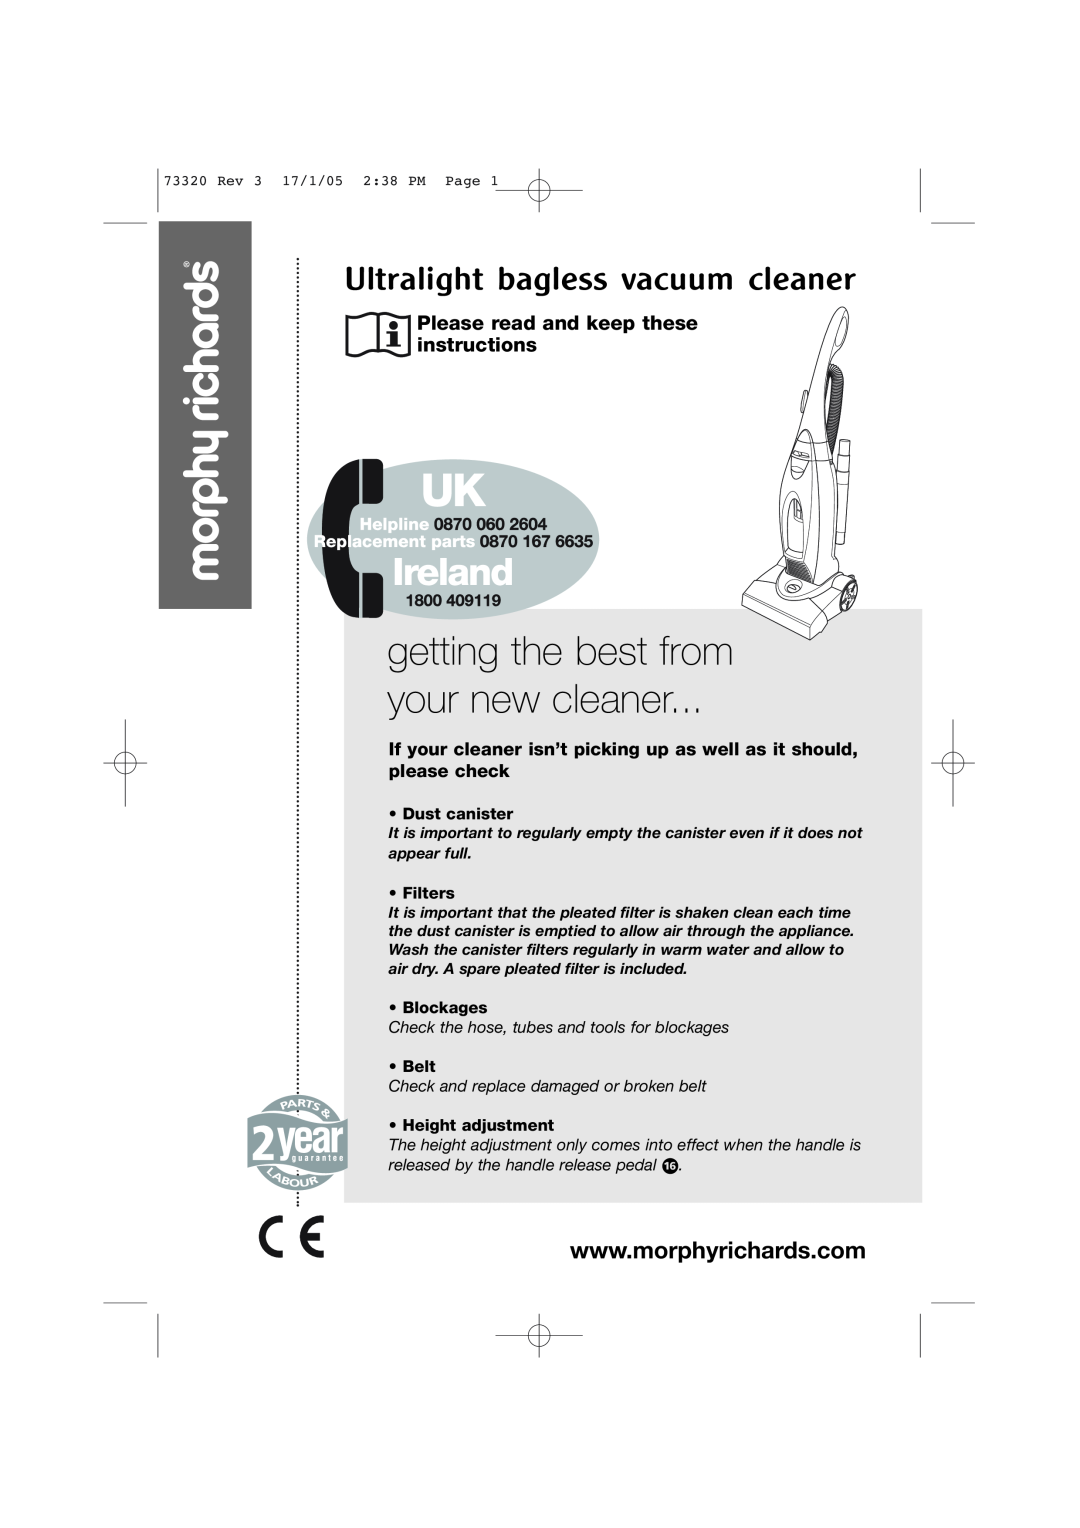 Morphy Richards Upright Bagless Vacuum Cleaner manual Dust canister, Filters, Blockages, Belt, Height adjustment 